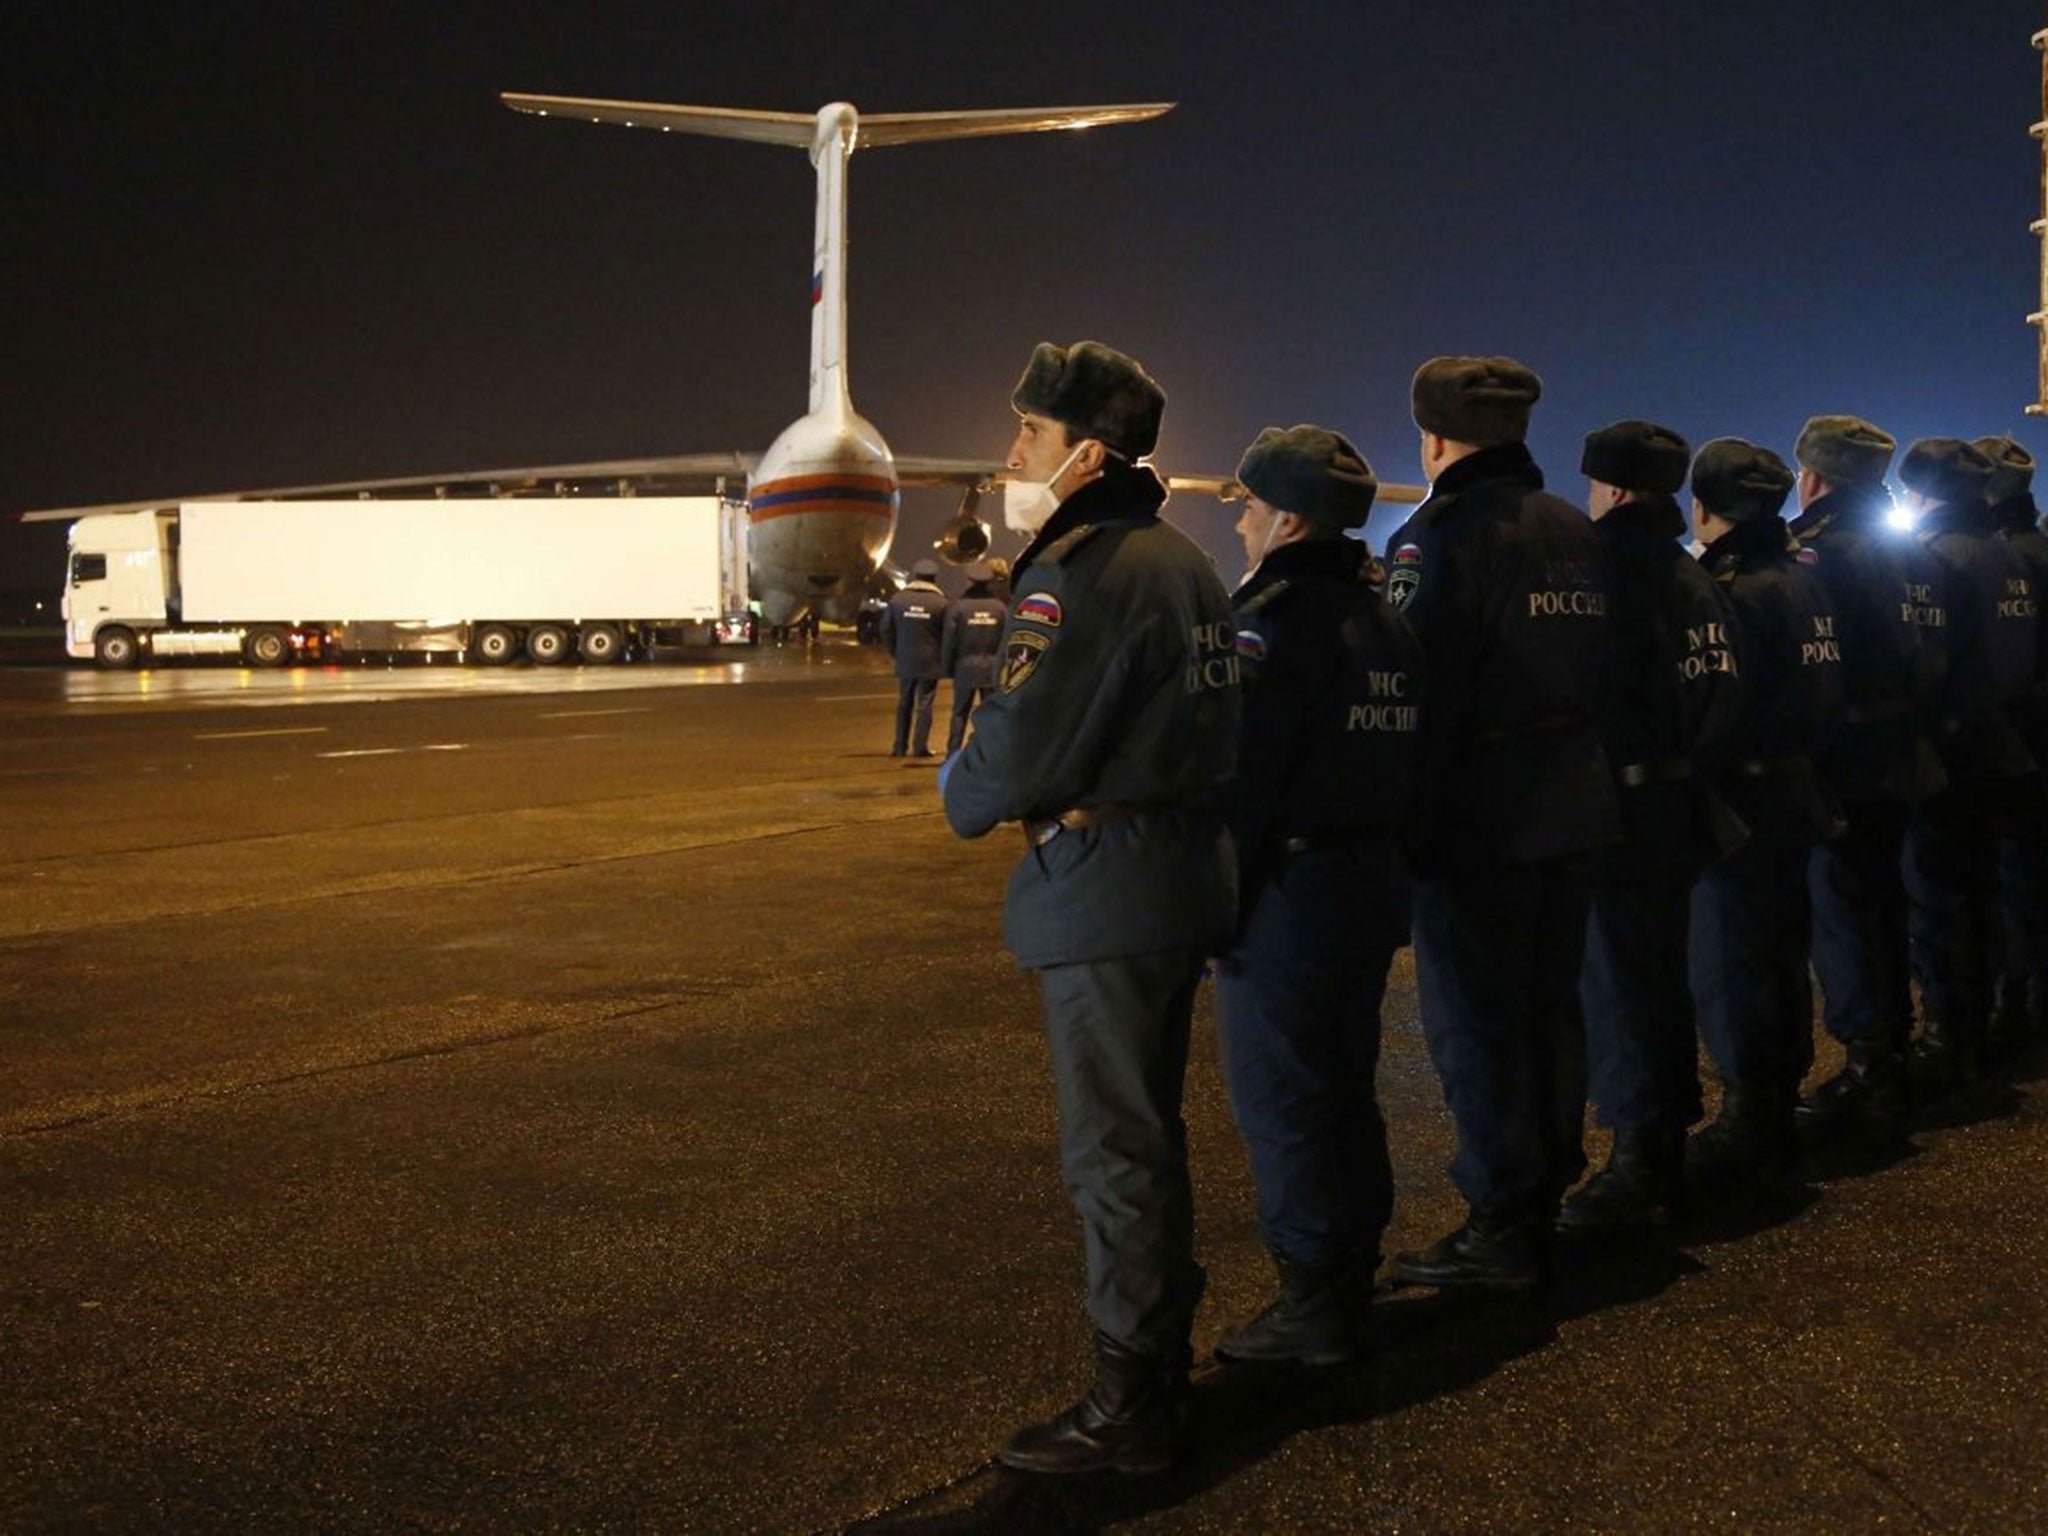 Russian Ministry for Emergency Situations employees prepare to load the bodies of the victims from the ministry's plane at the airport in St Petersburg on November 2, 2015.